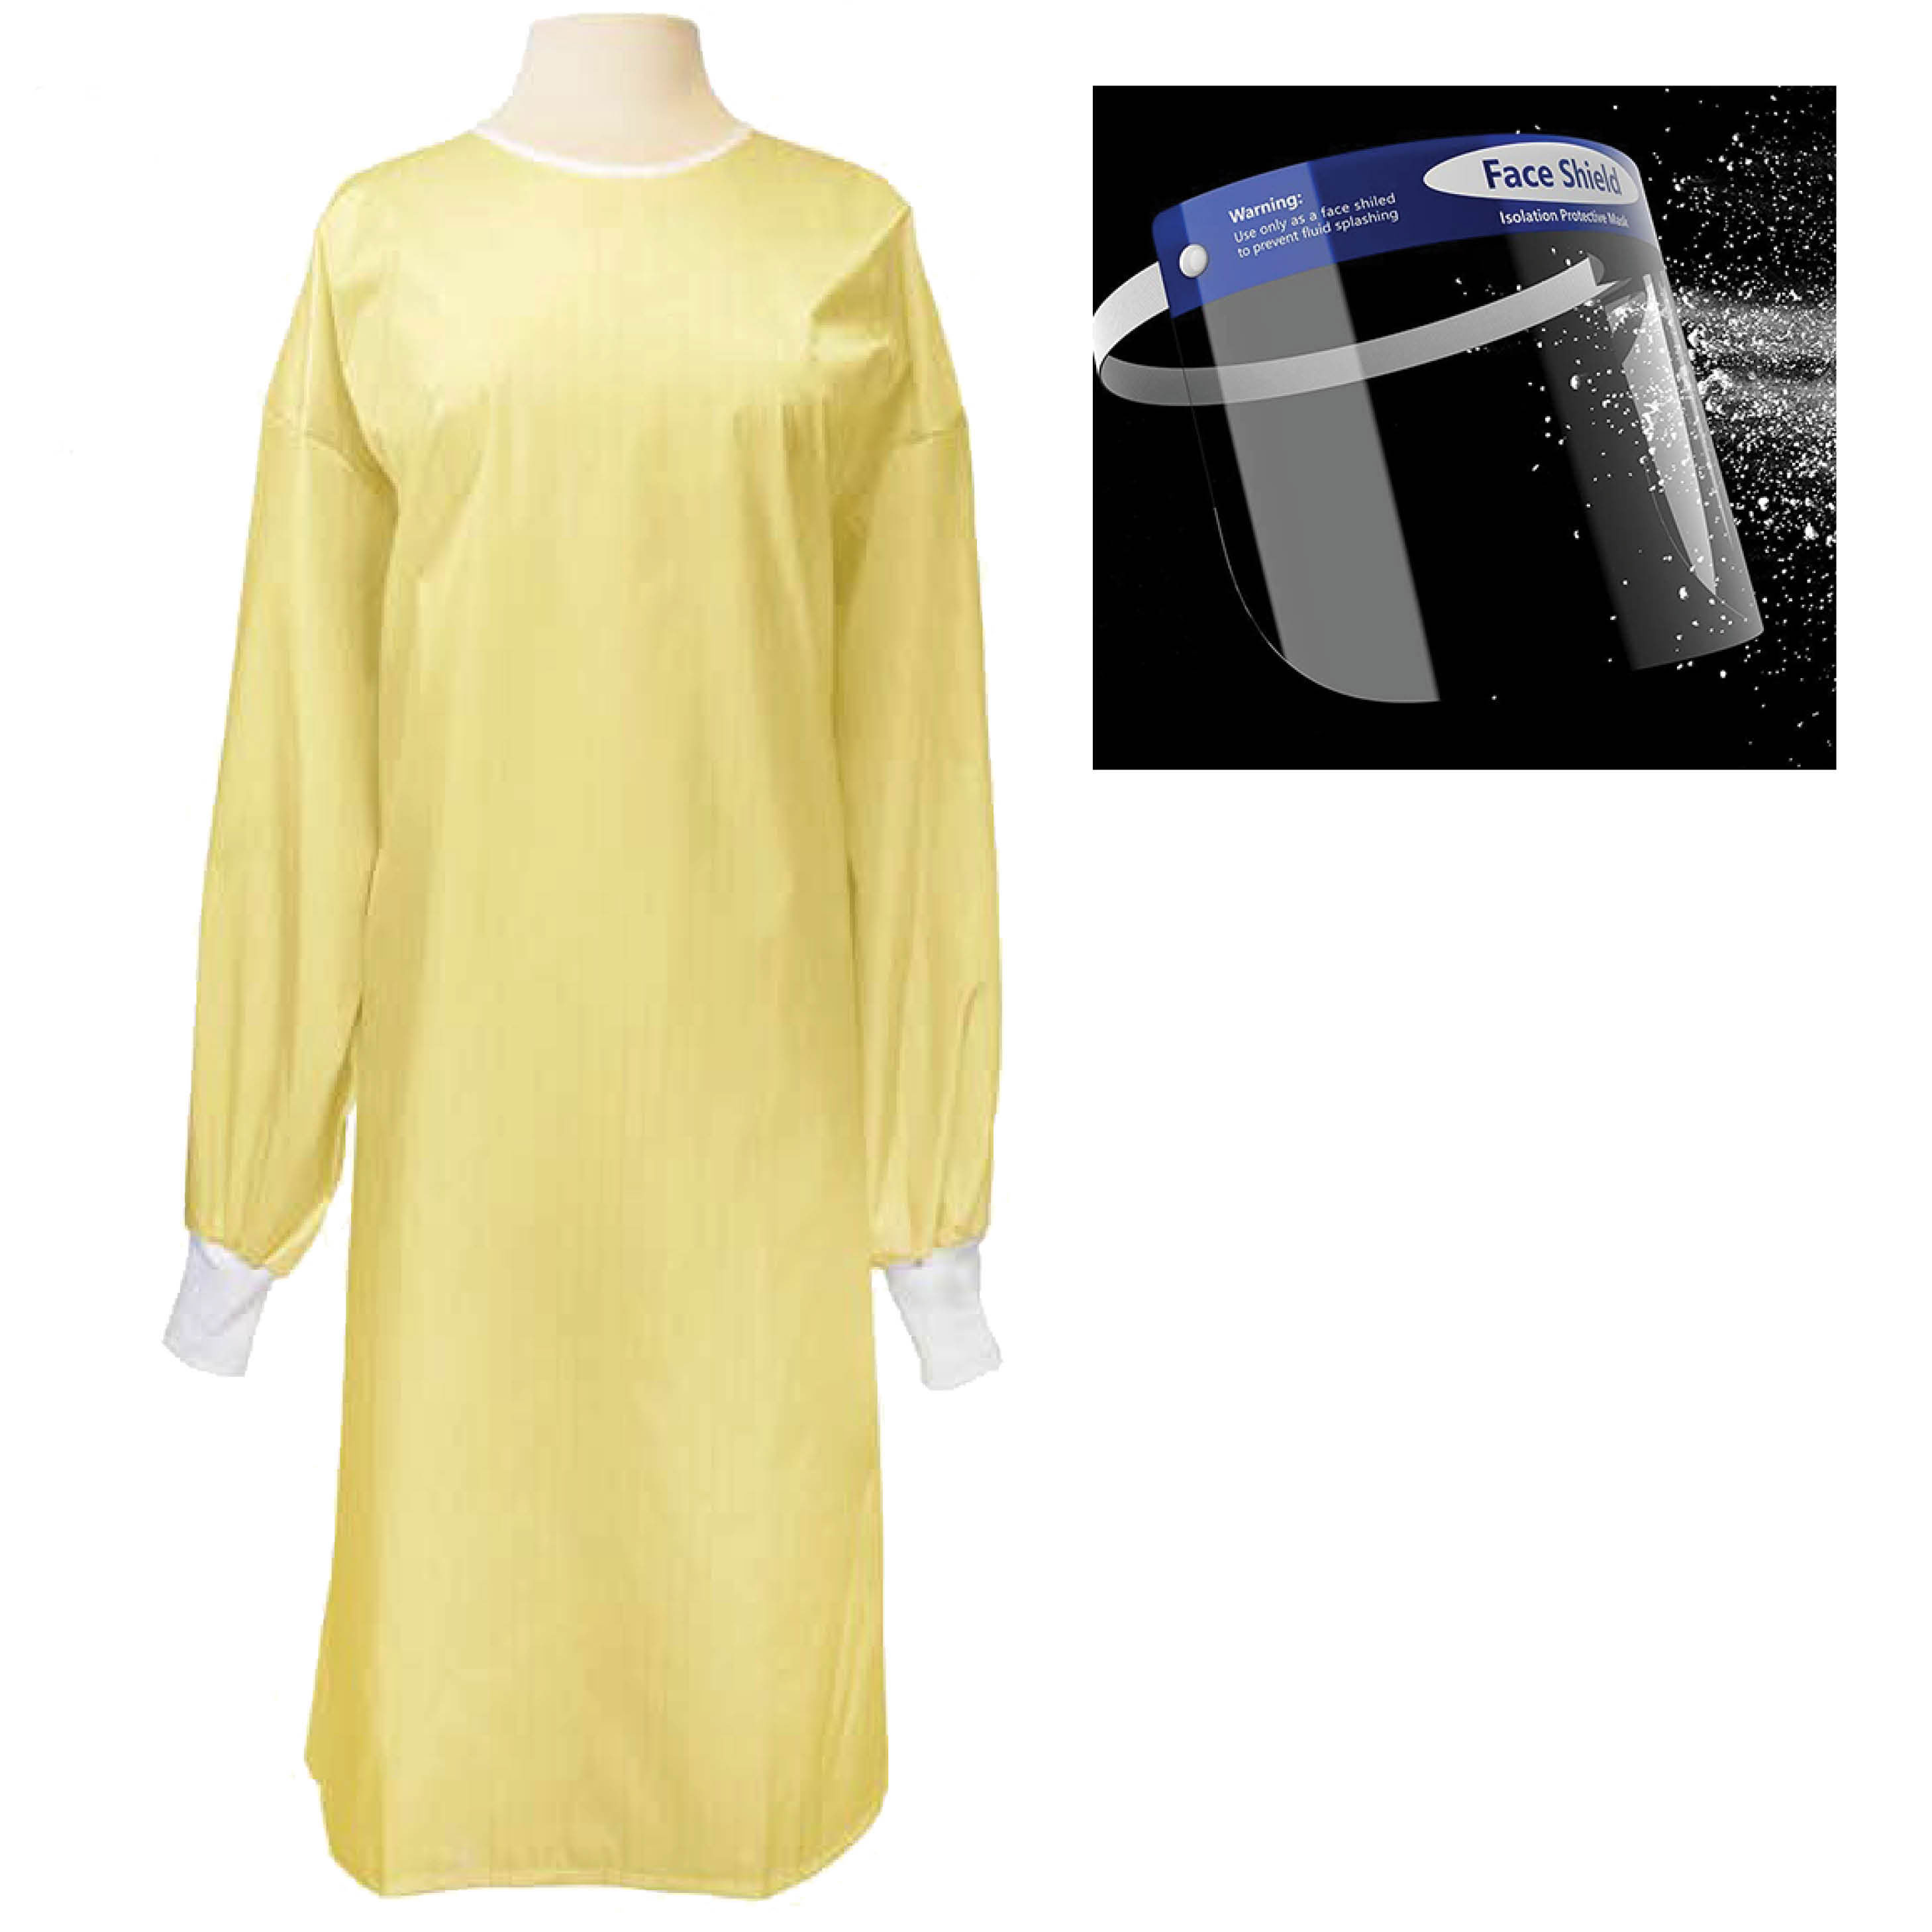 Student PPE Kit - Precaution Gown - 300048-YLW - Face-Shield